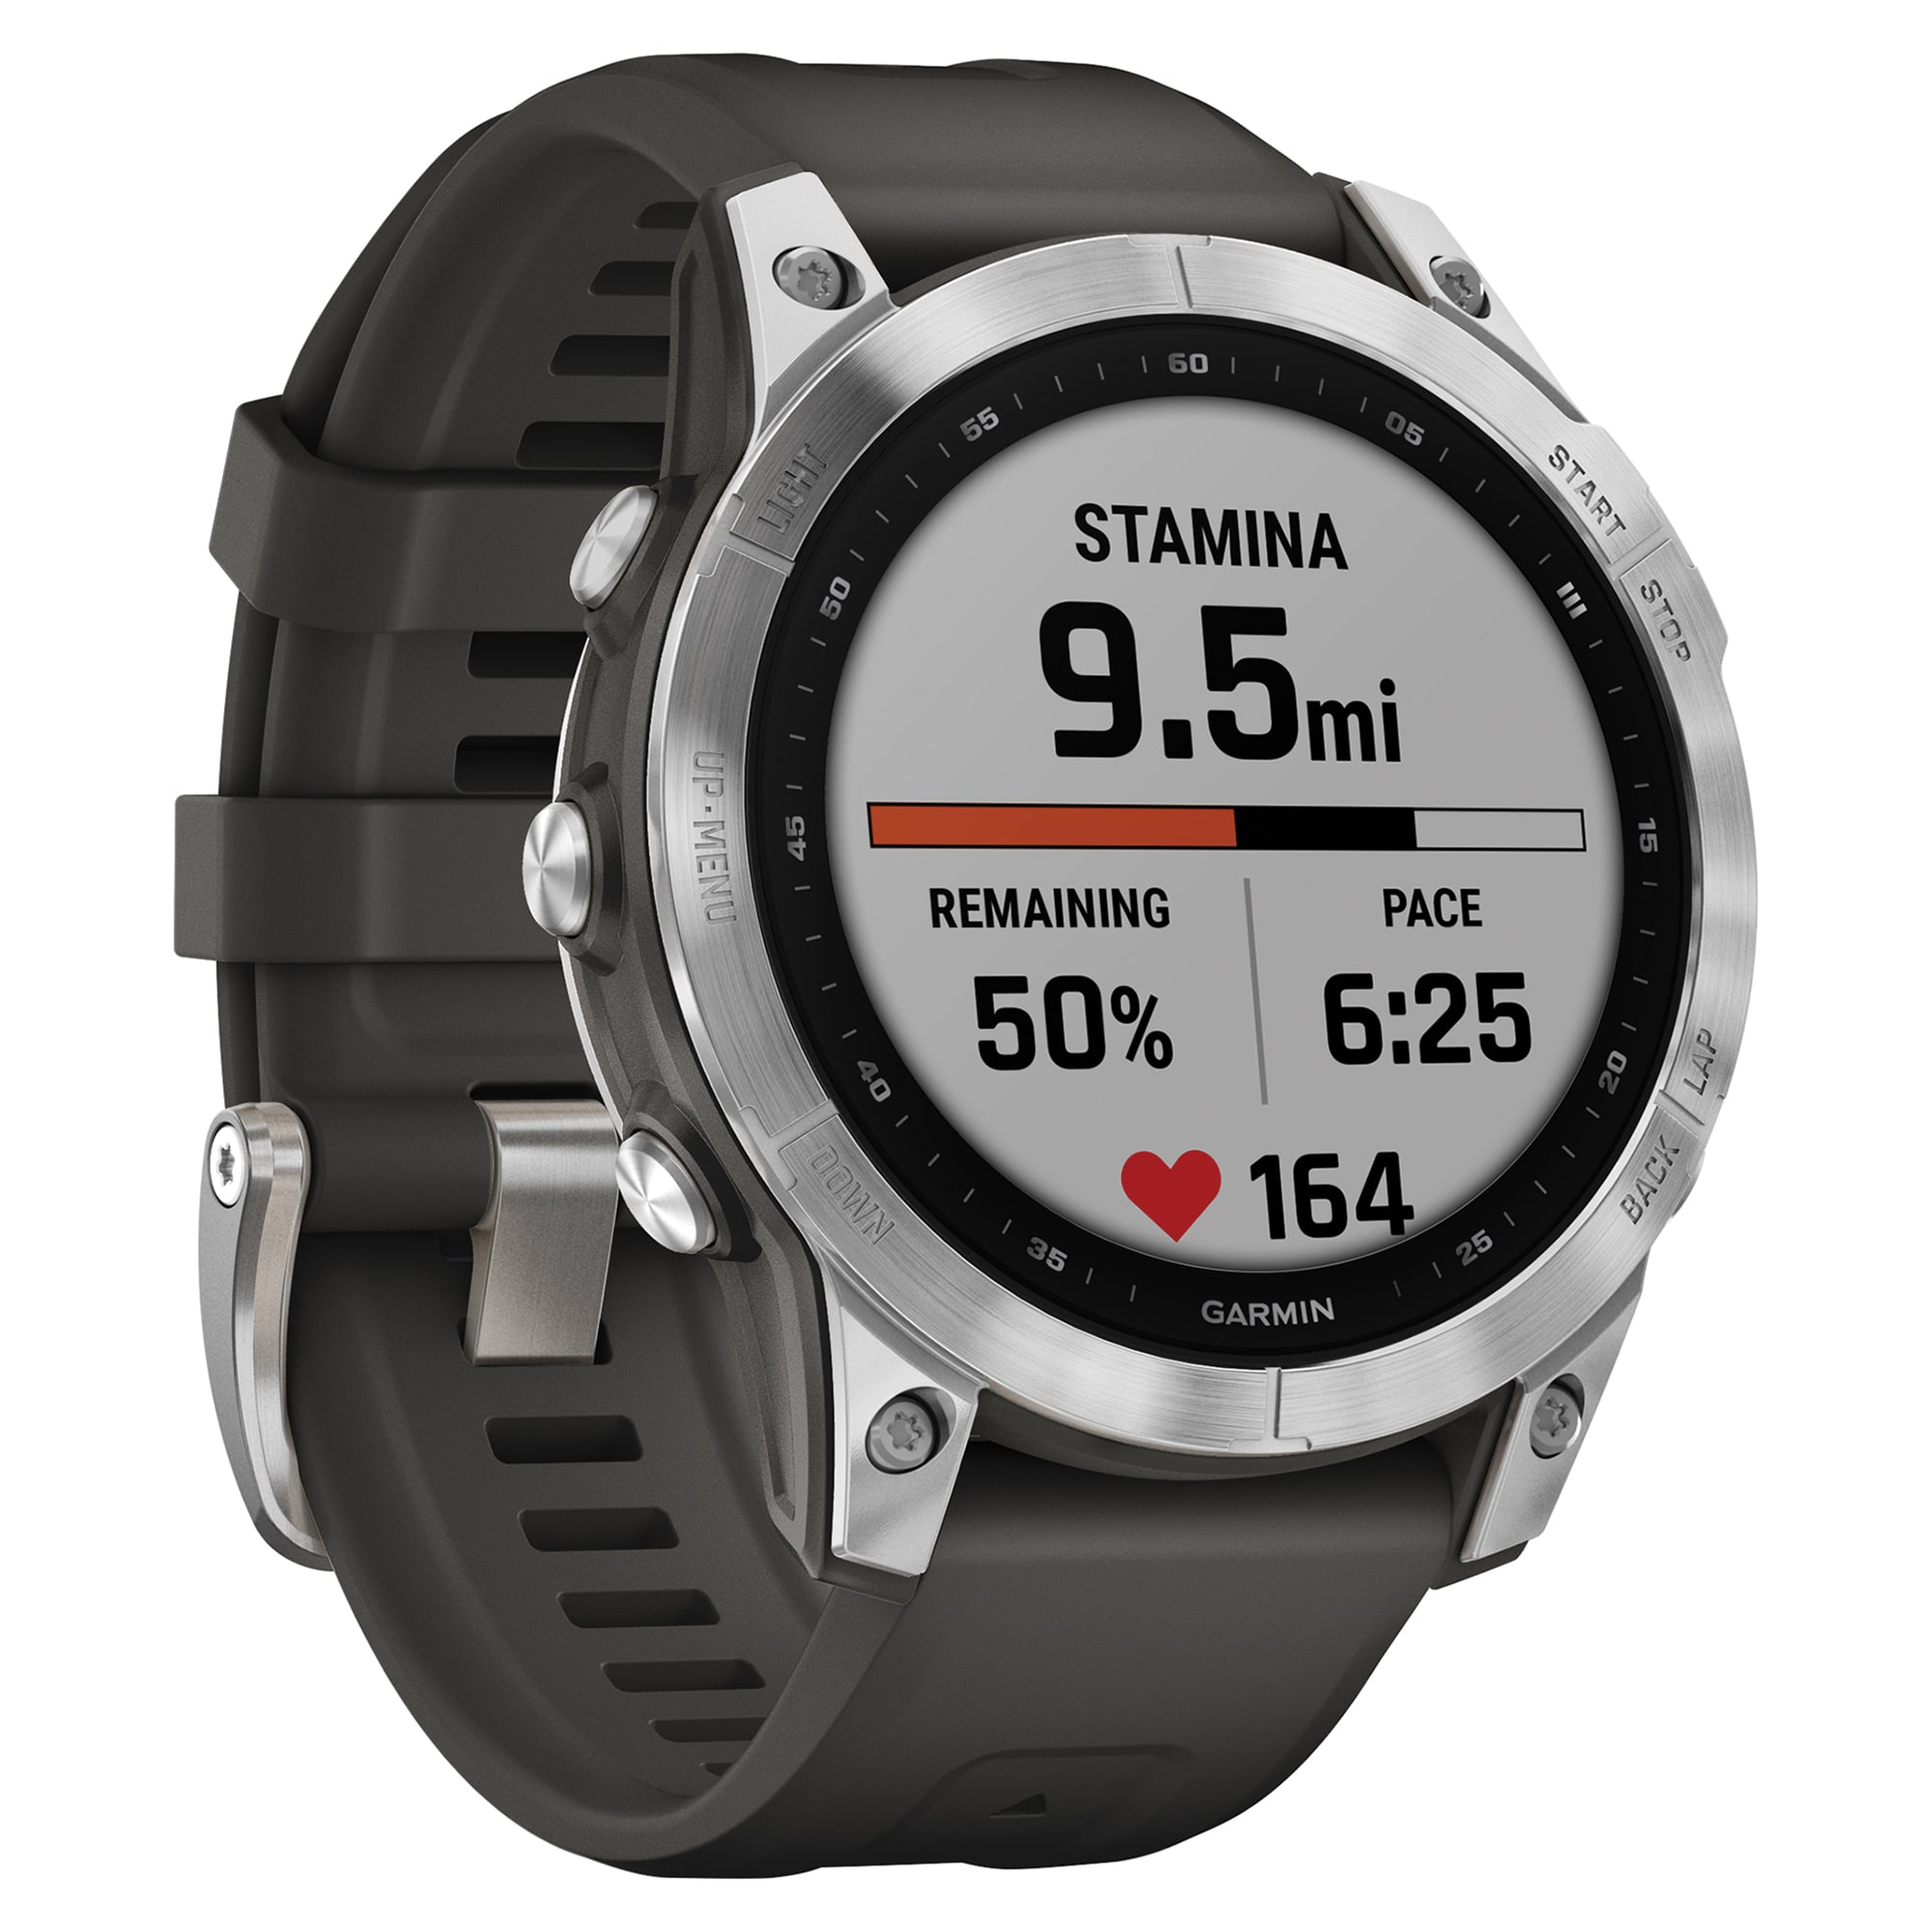 Garmin Epix 2 review: This is the watch sports fans have been waiting for!